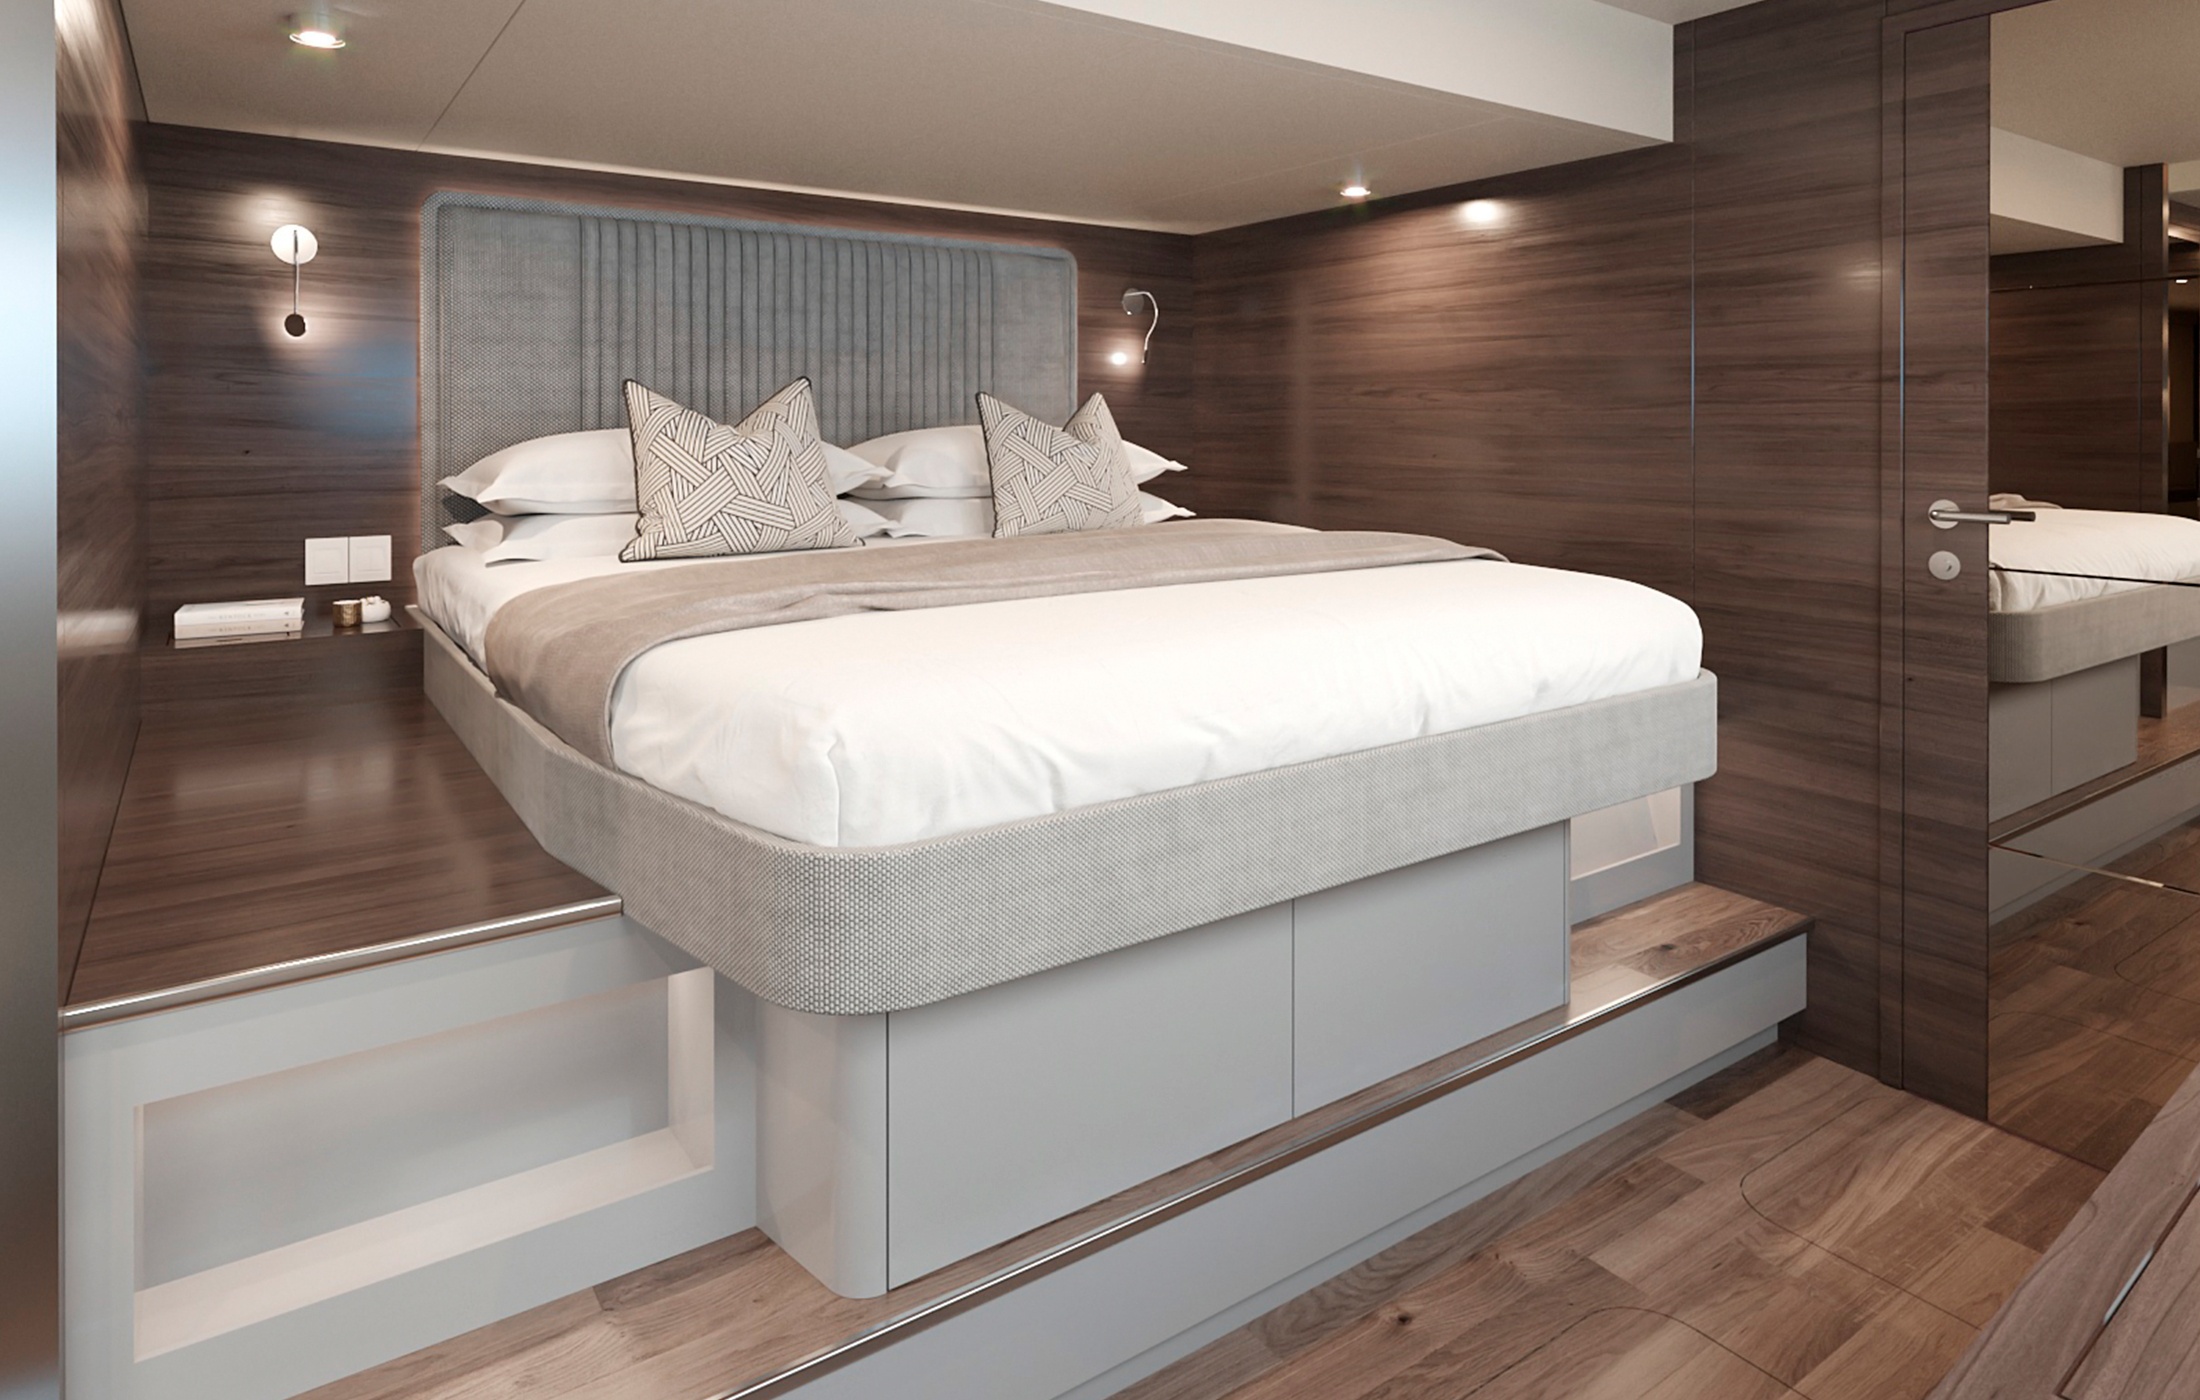 Yachts luxurious owner's cabin with extra large double bed in brown tones